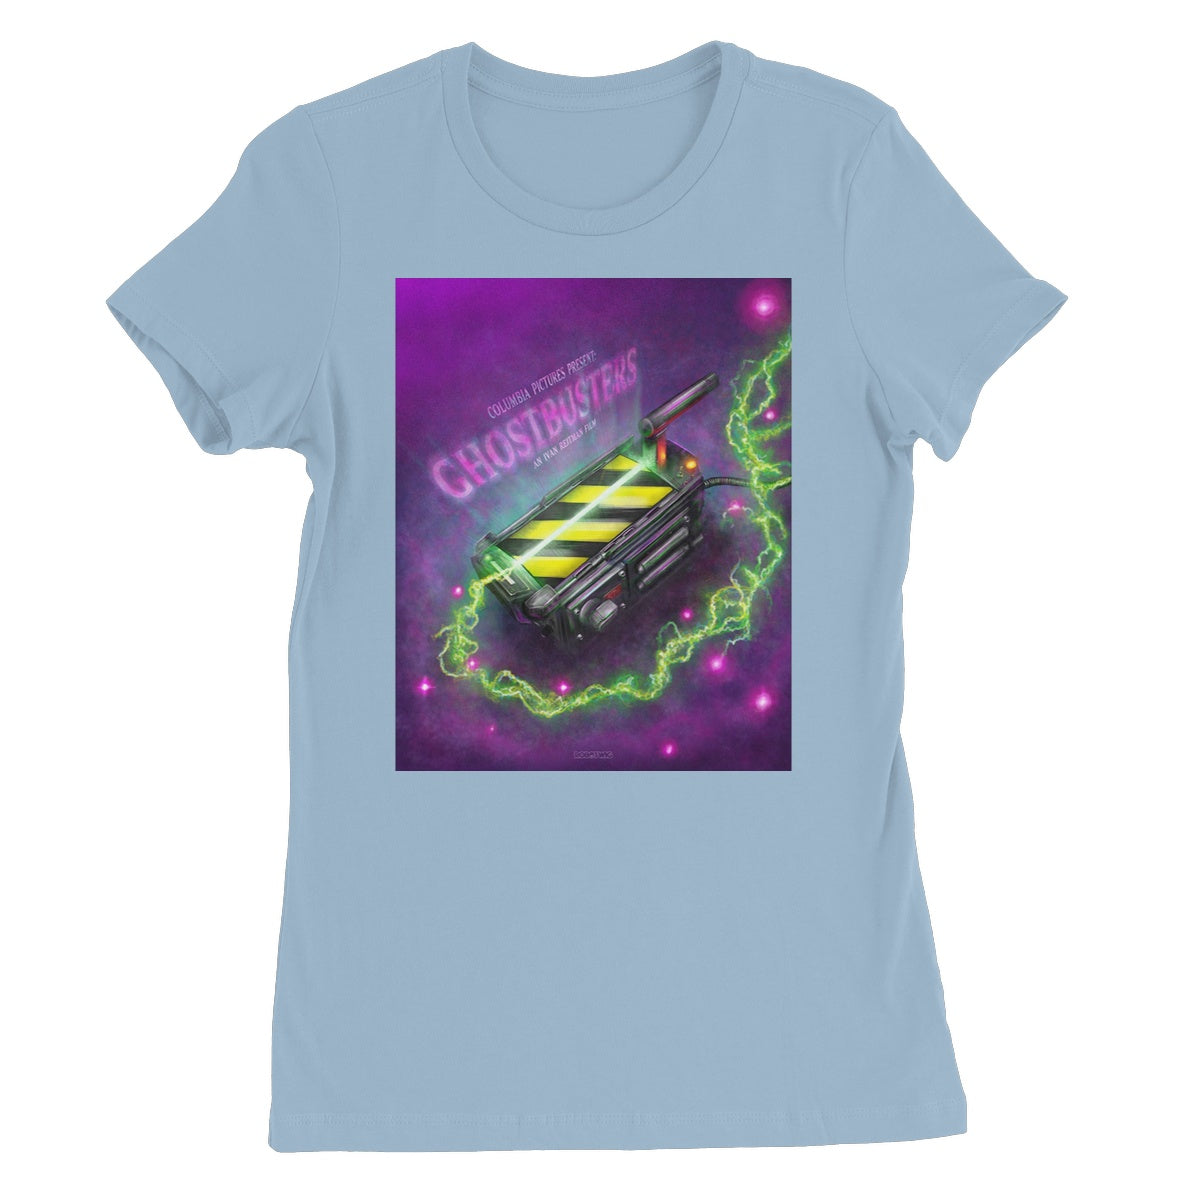 Ghostbusters Illustrated Women's Favourite T-Shirt